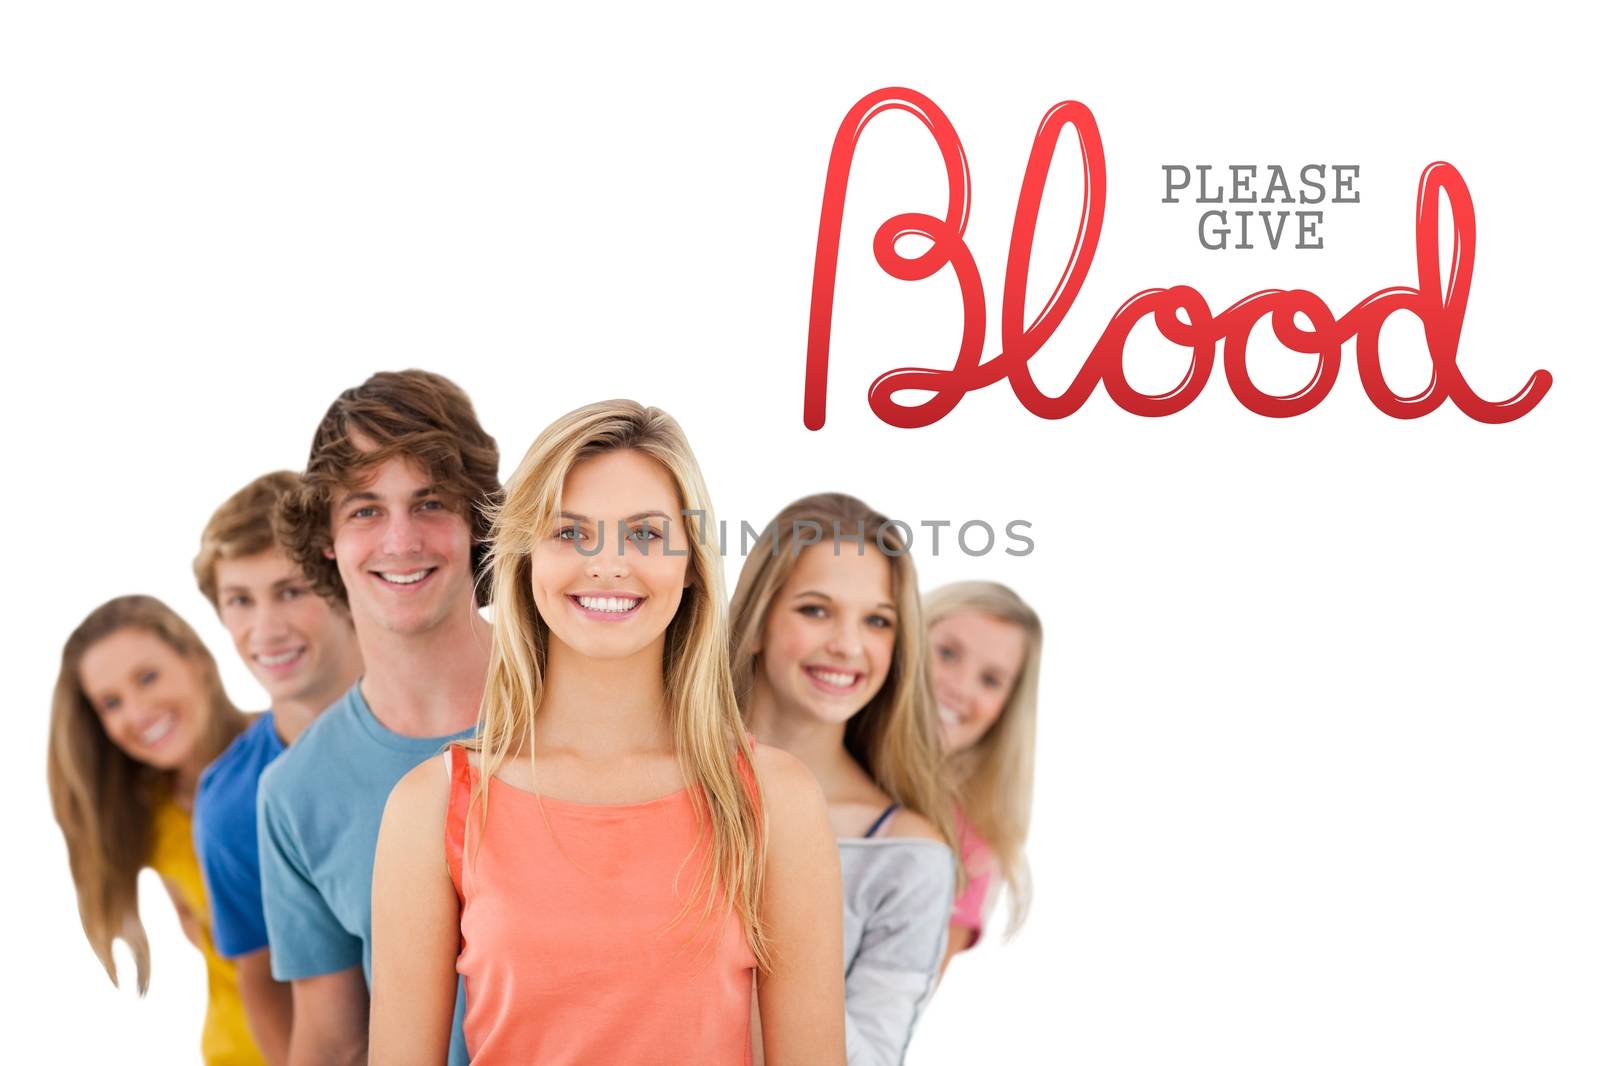 Group of people and blood donation concept by Wavebreakmedia